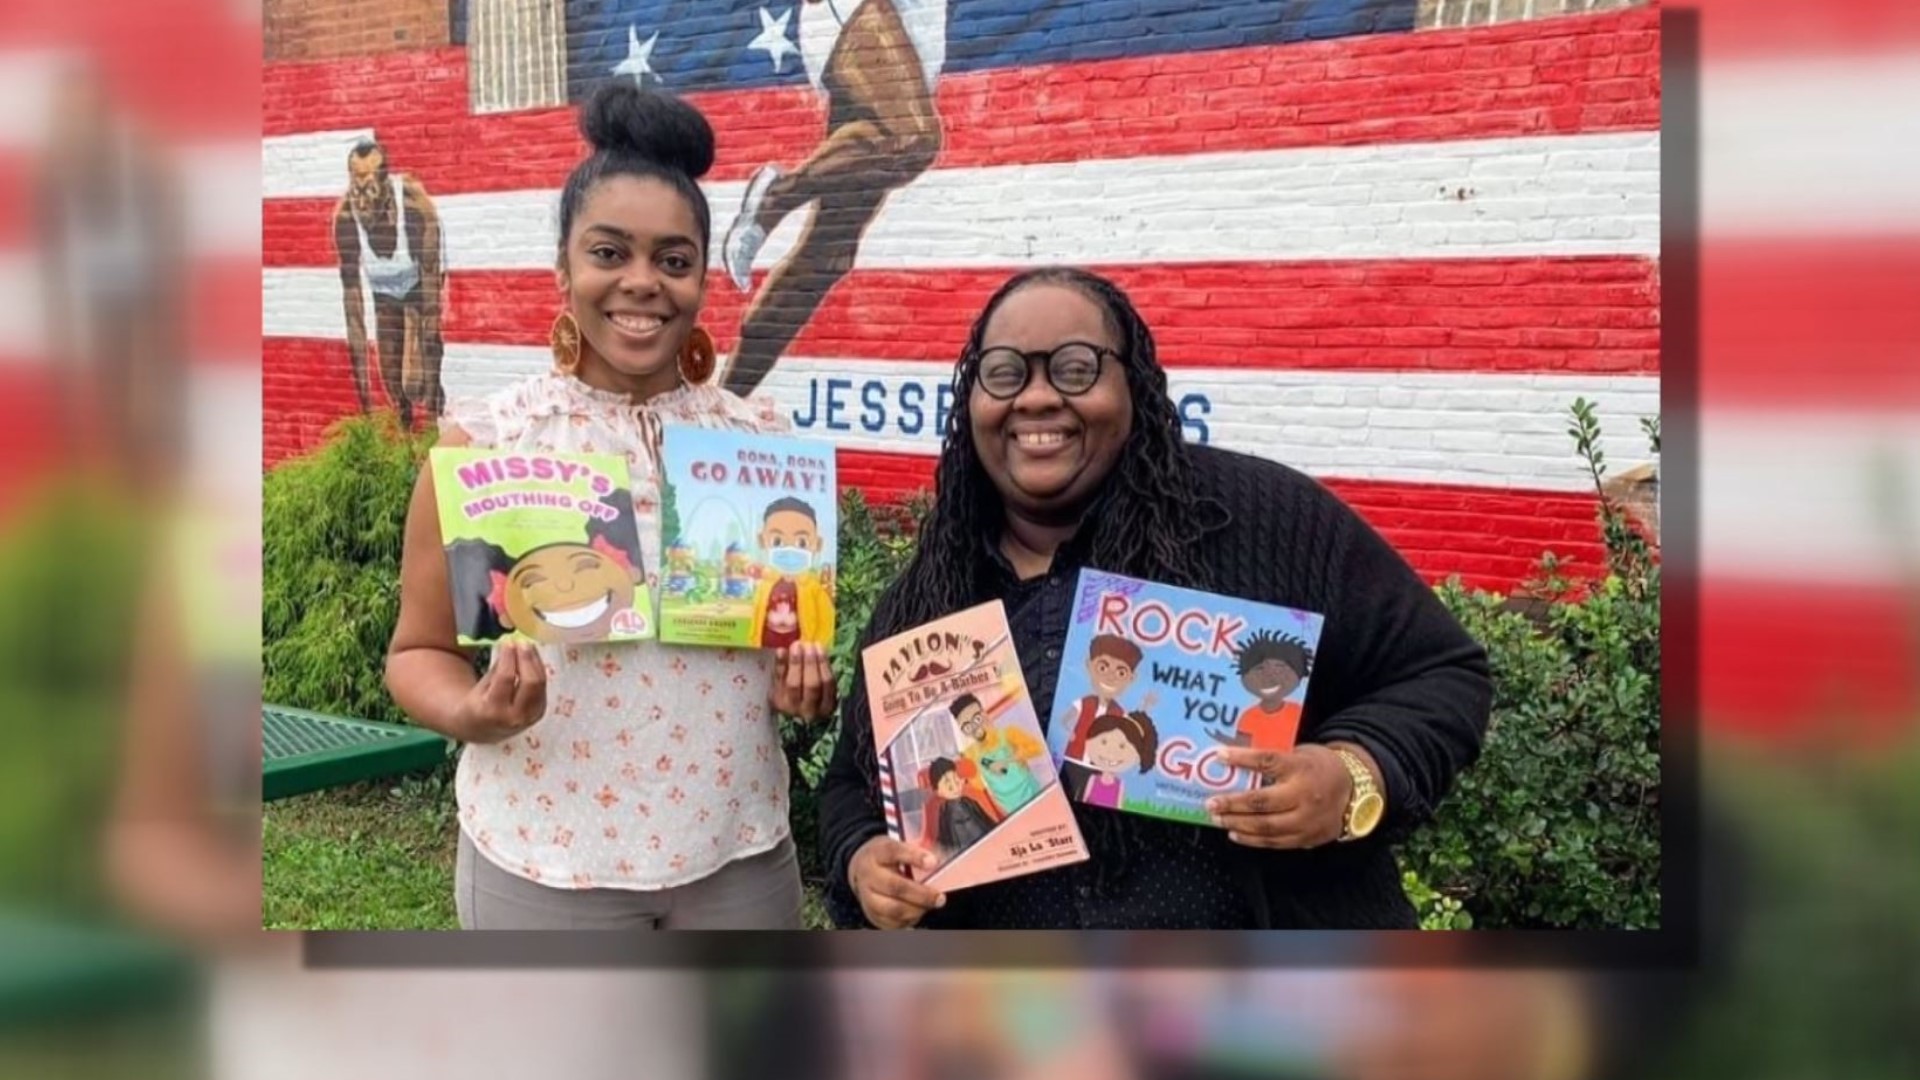 Collectively, Aja Owens and Adrienne Draper have published five children's books that reflect families and children of color.